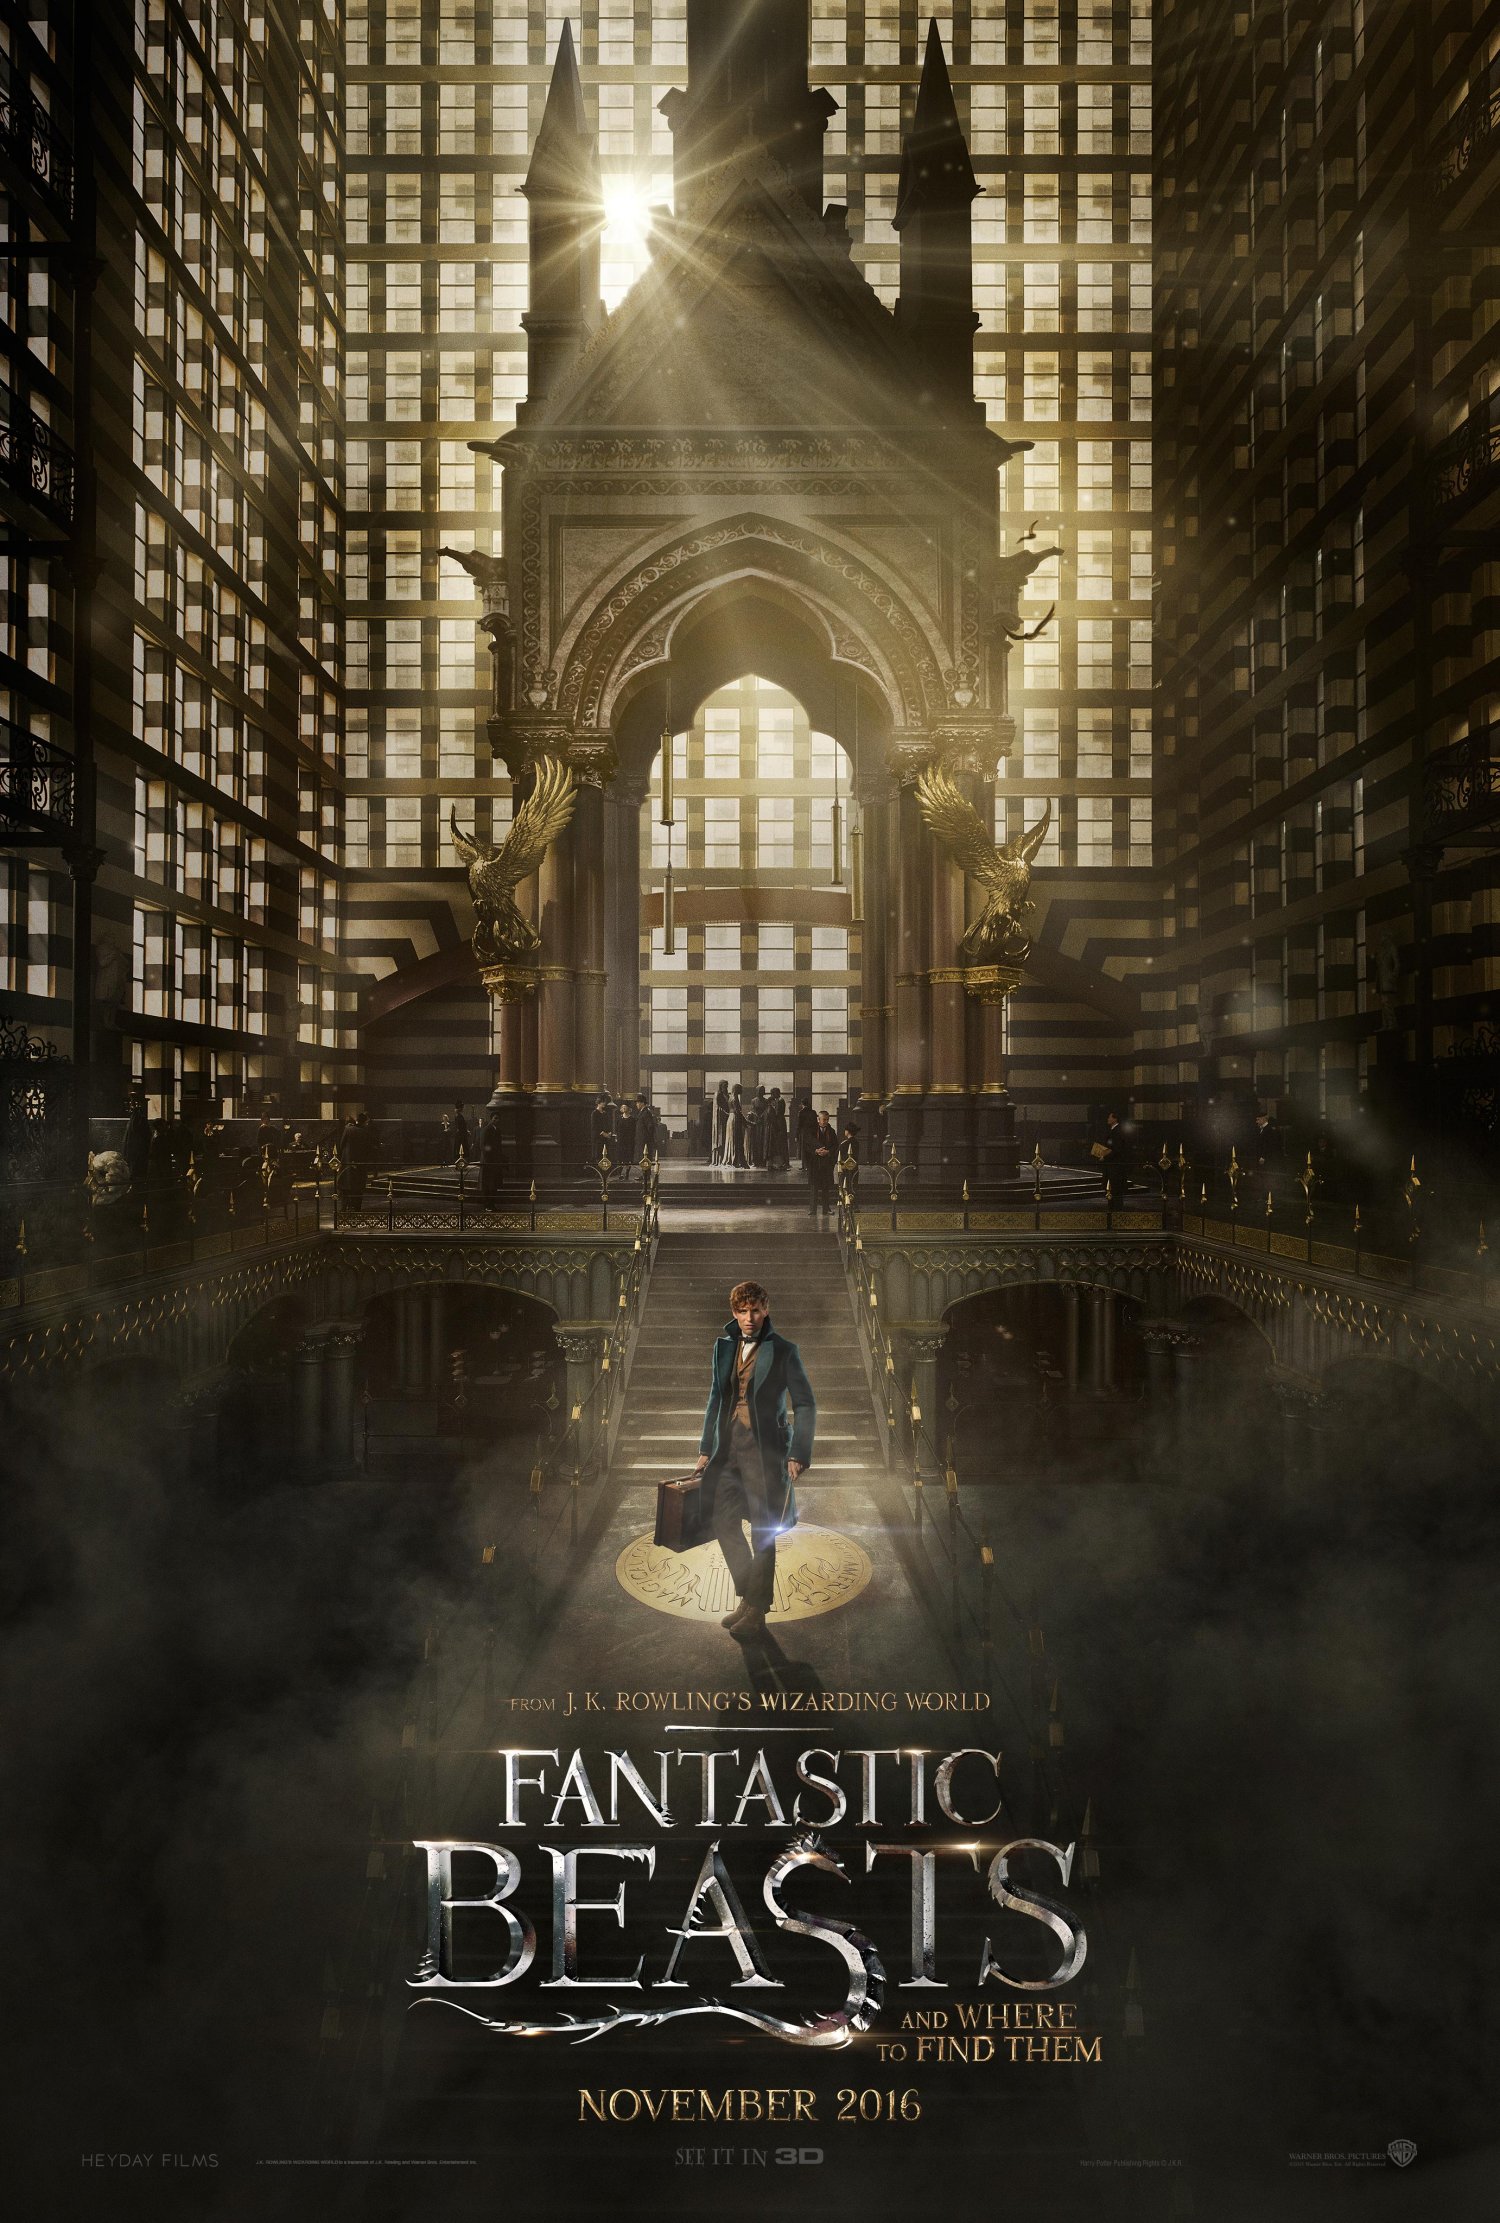 Online Watch Fantastic Beasts And Where To Find Them Movie 2016 Full-Length